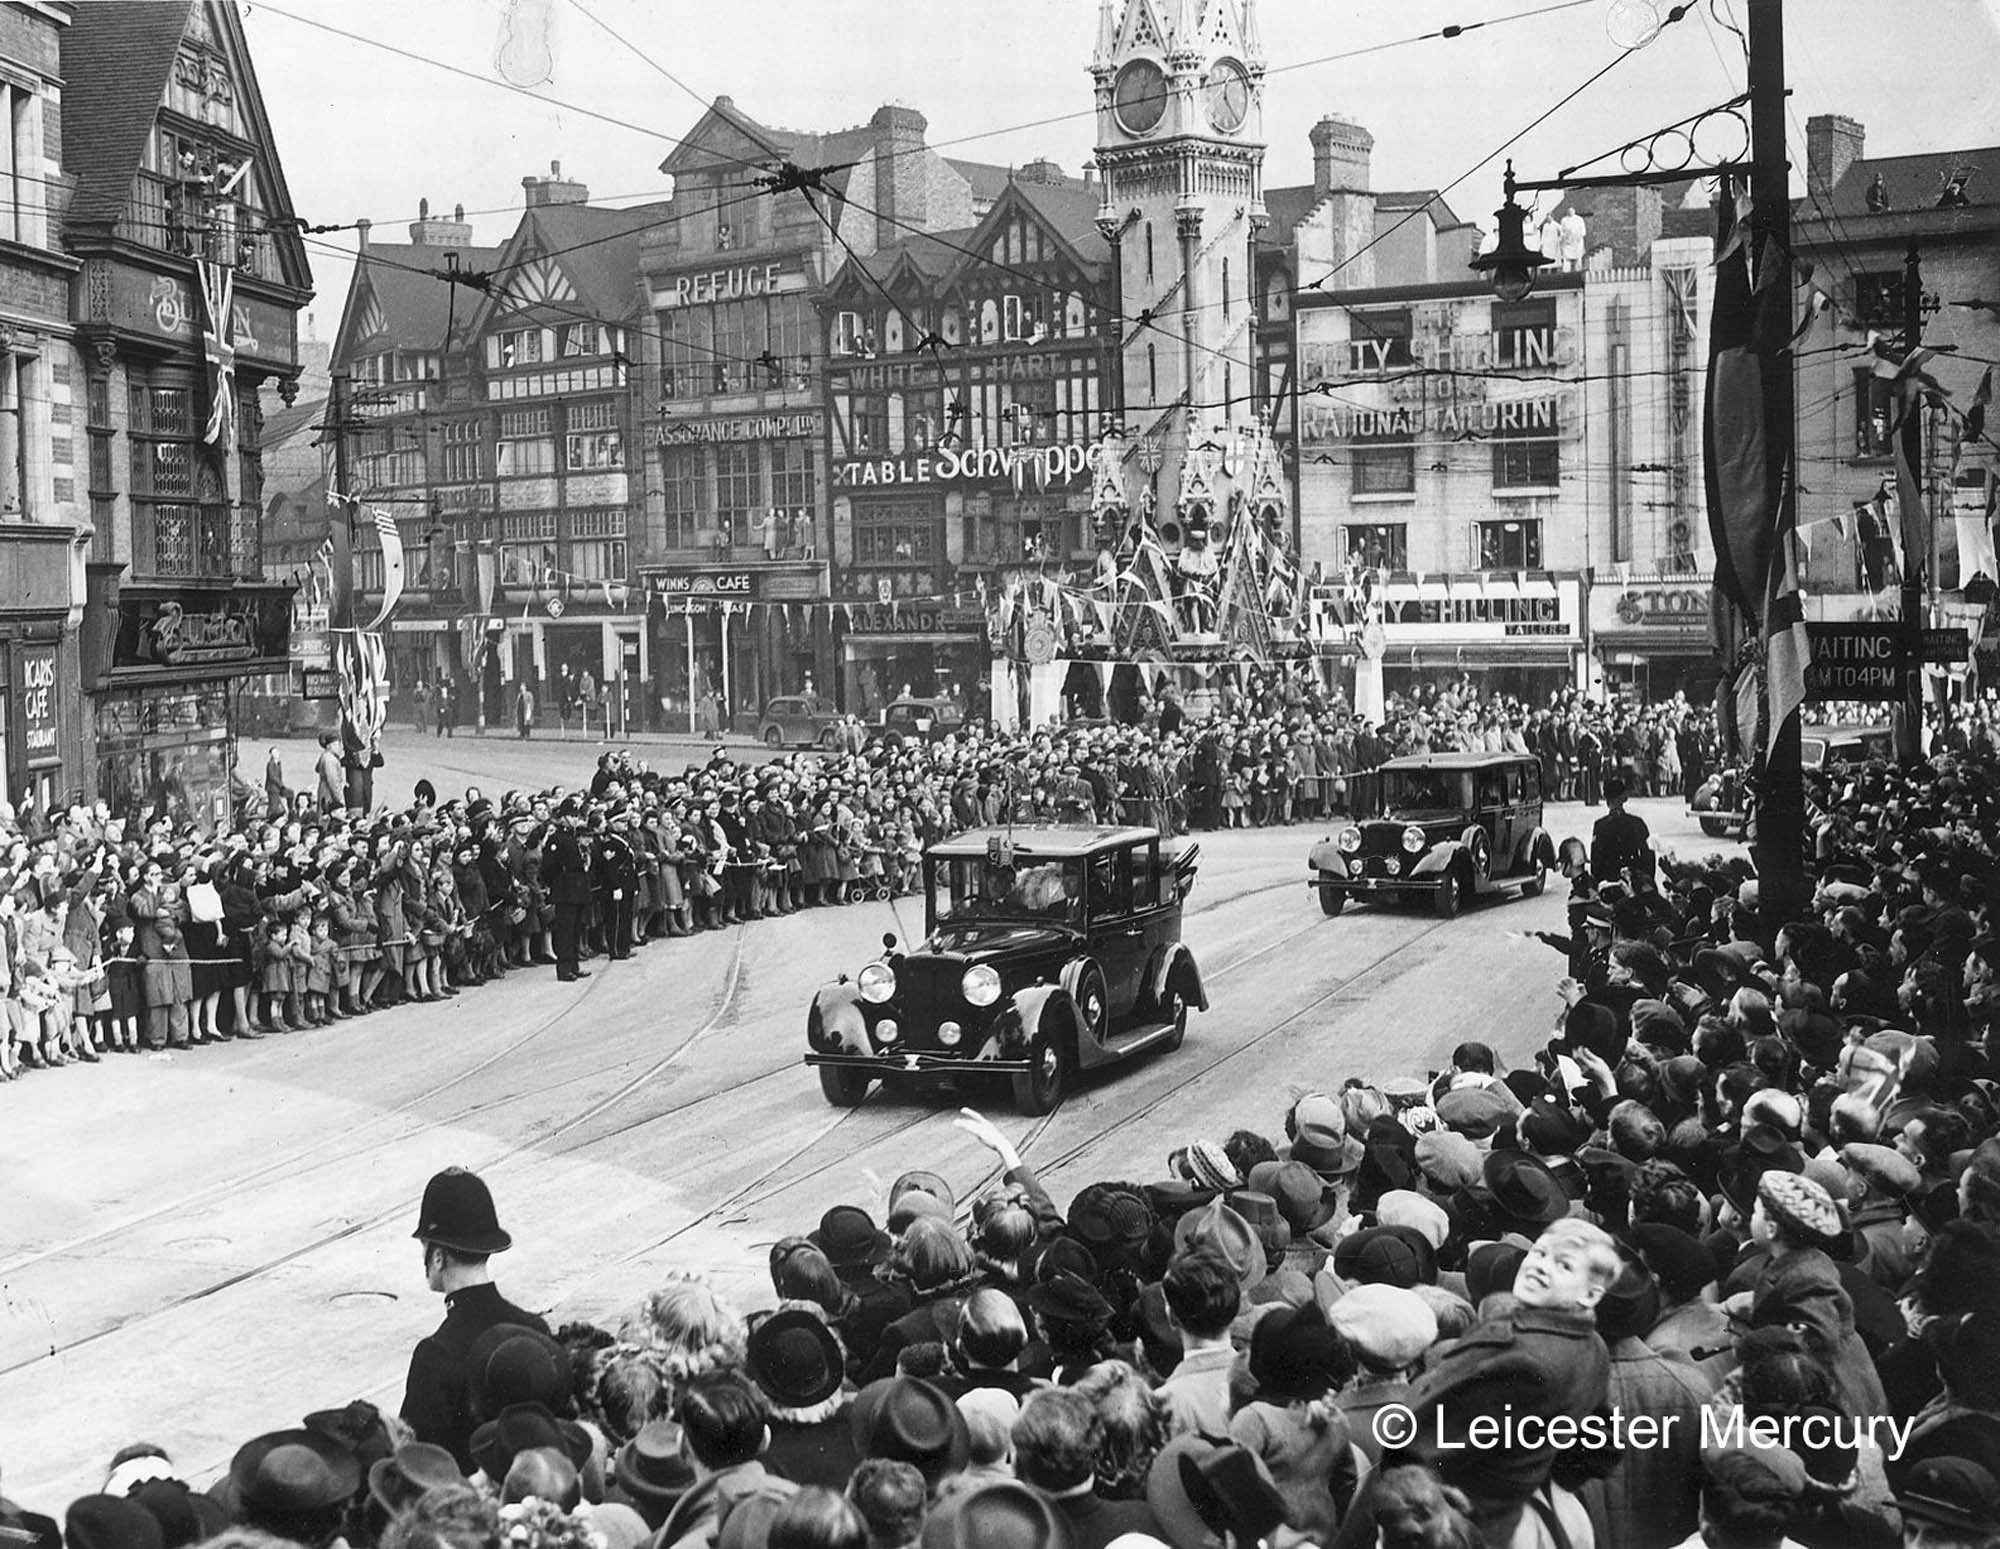 King George V passes by crowds gathered near The Clock Tower, 1919 - Leicester Mercury